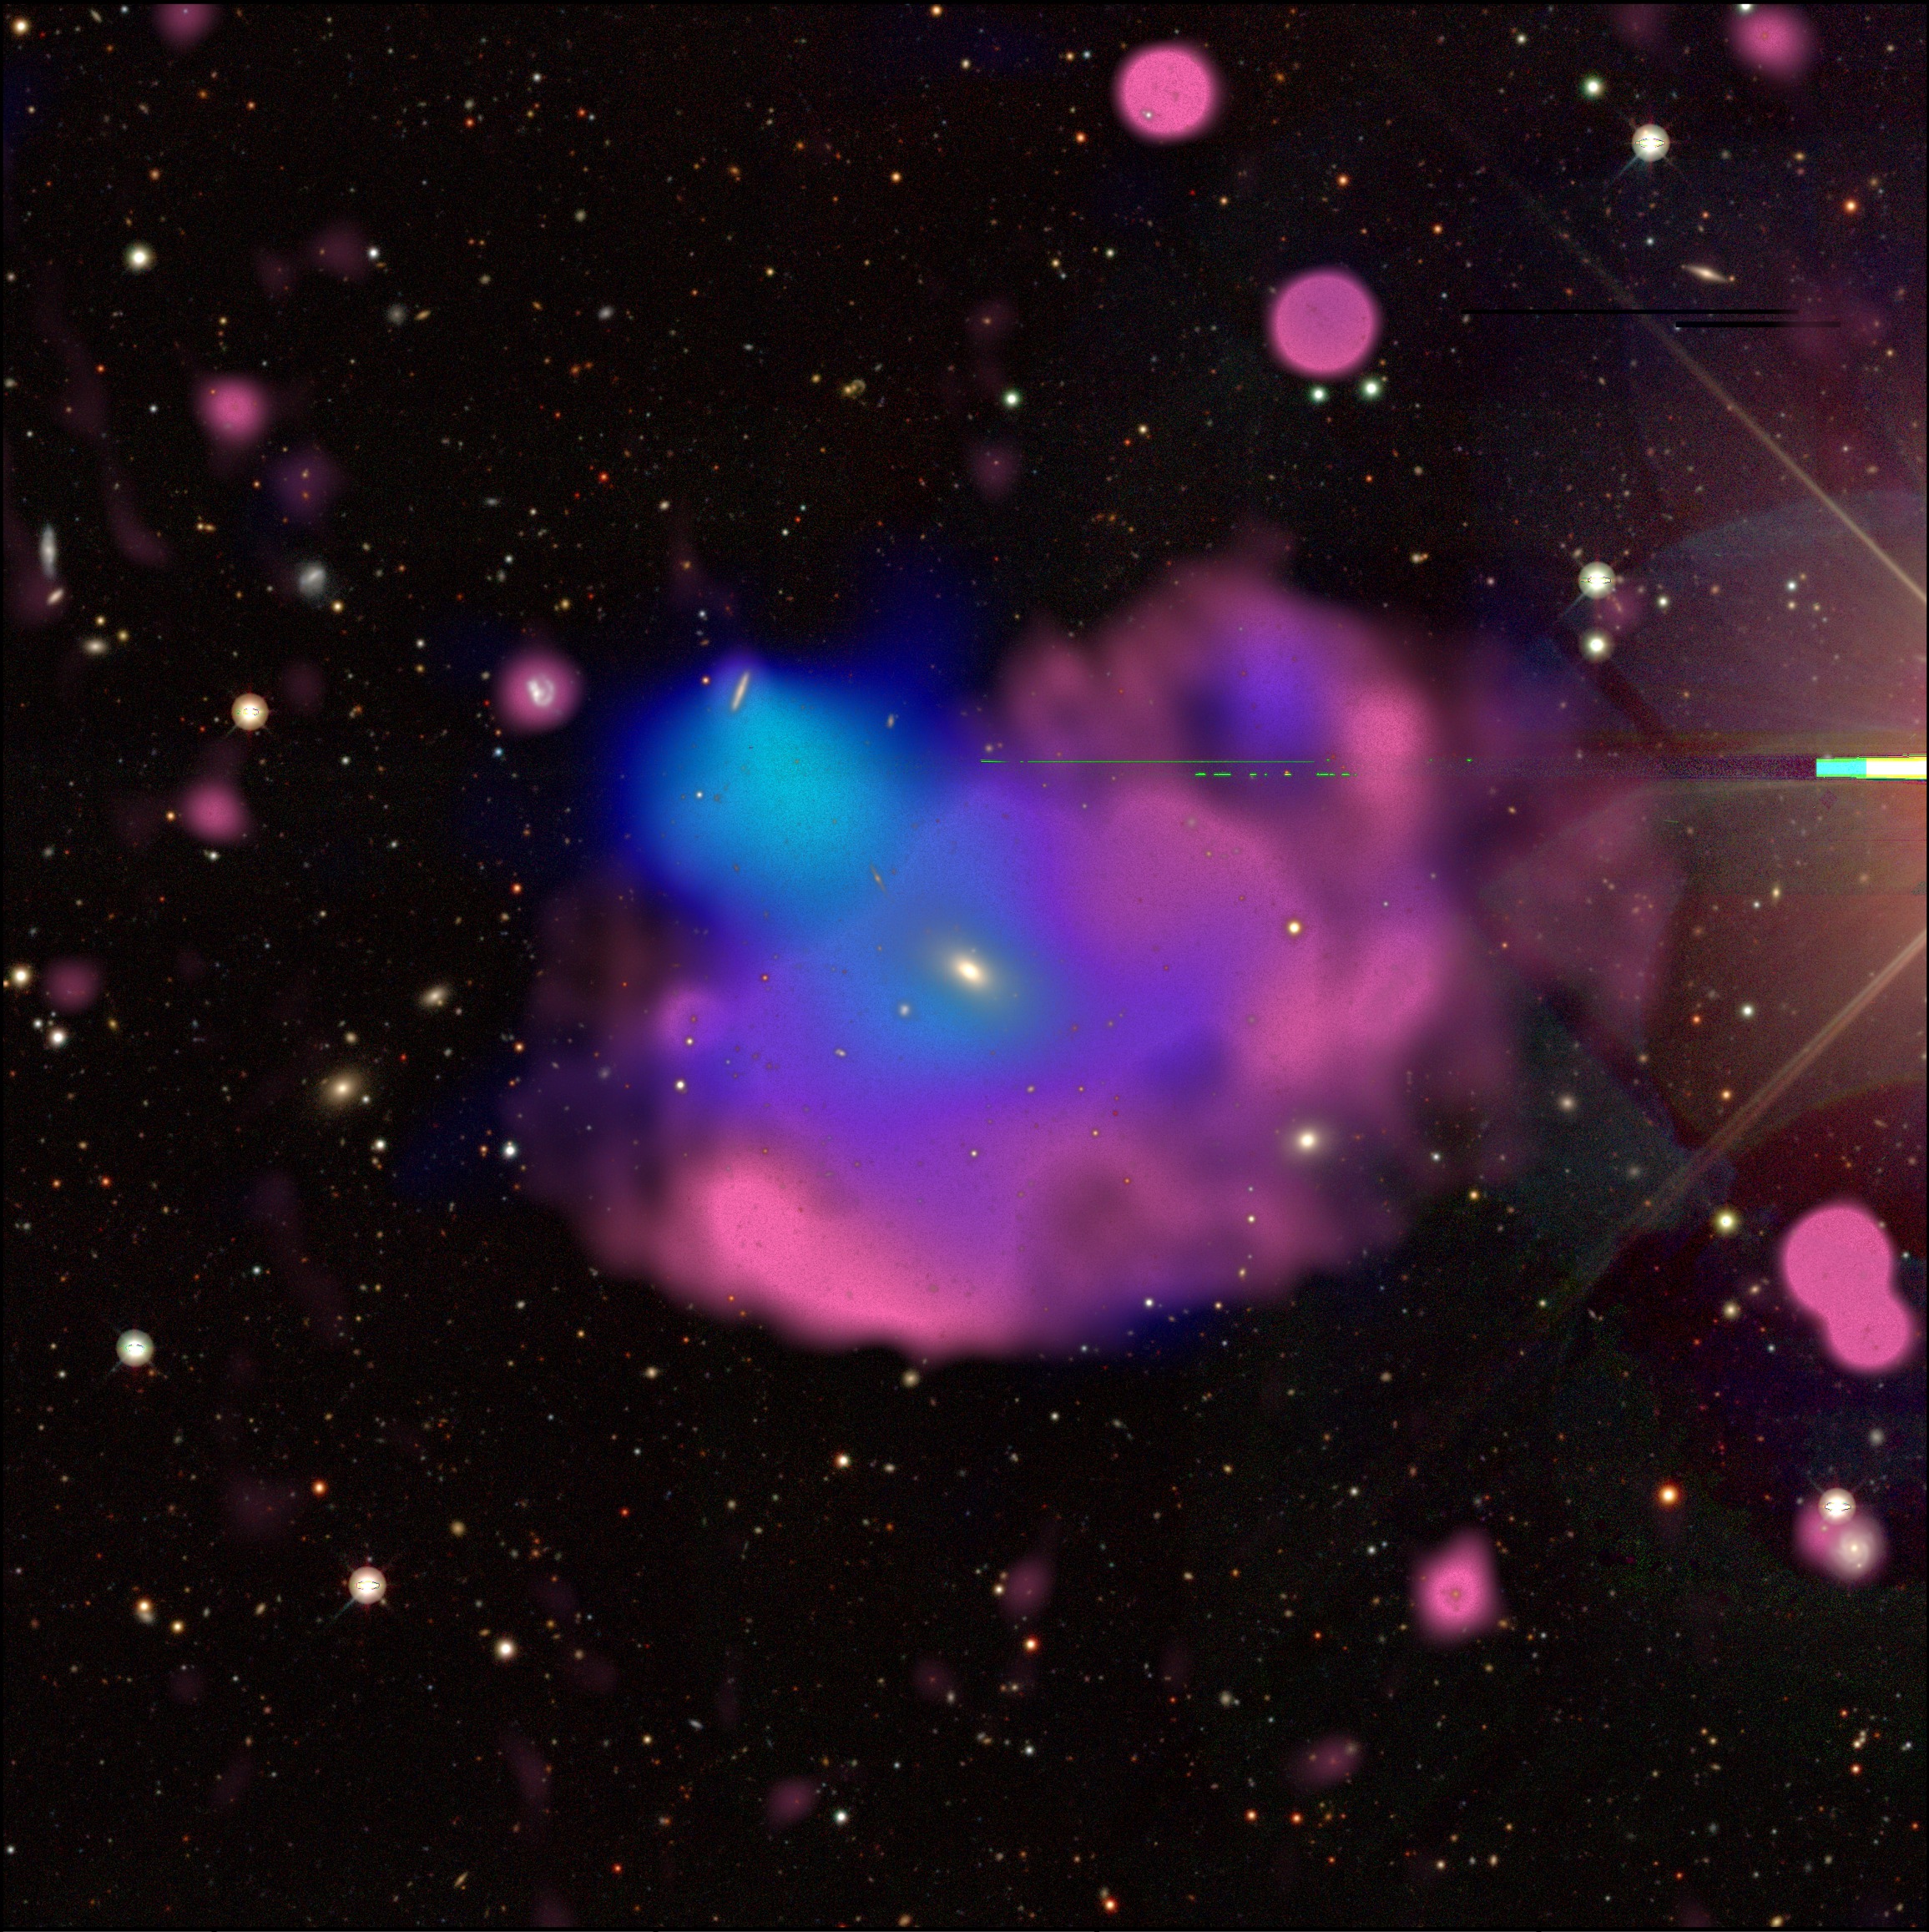 A mosaic of Cloverleaf's radio emission at multiple wavelengths: visible light observations from the Legacy Survey DESI (Dark Energy Spectroscopic Instrument) in white and yellow;  XMM-Newton X-rays in blue;  and ASKAP (the Australian Square Kilometer Array Pathfinder) radius in red.  Credit: Xiaoyuan Zhang and Matthias Kluge (MPE), Baerbel Korbalski (CSIRO).